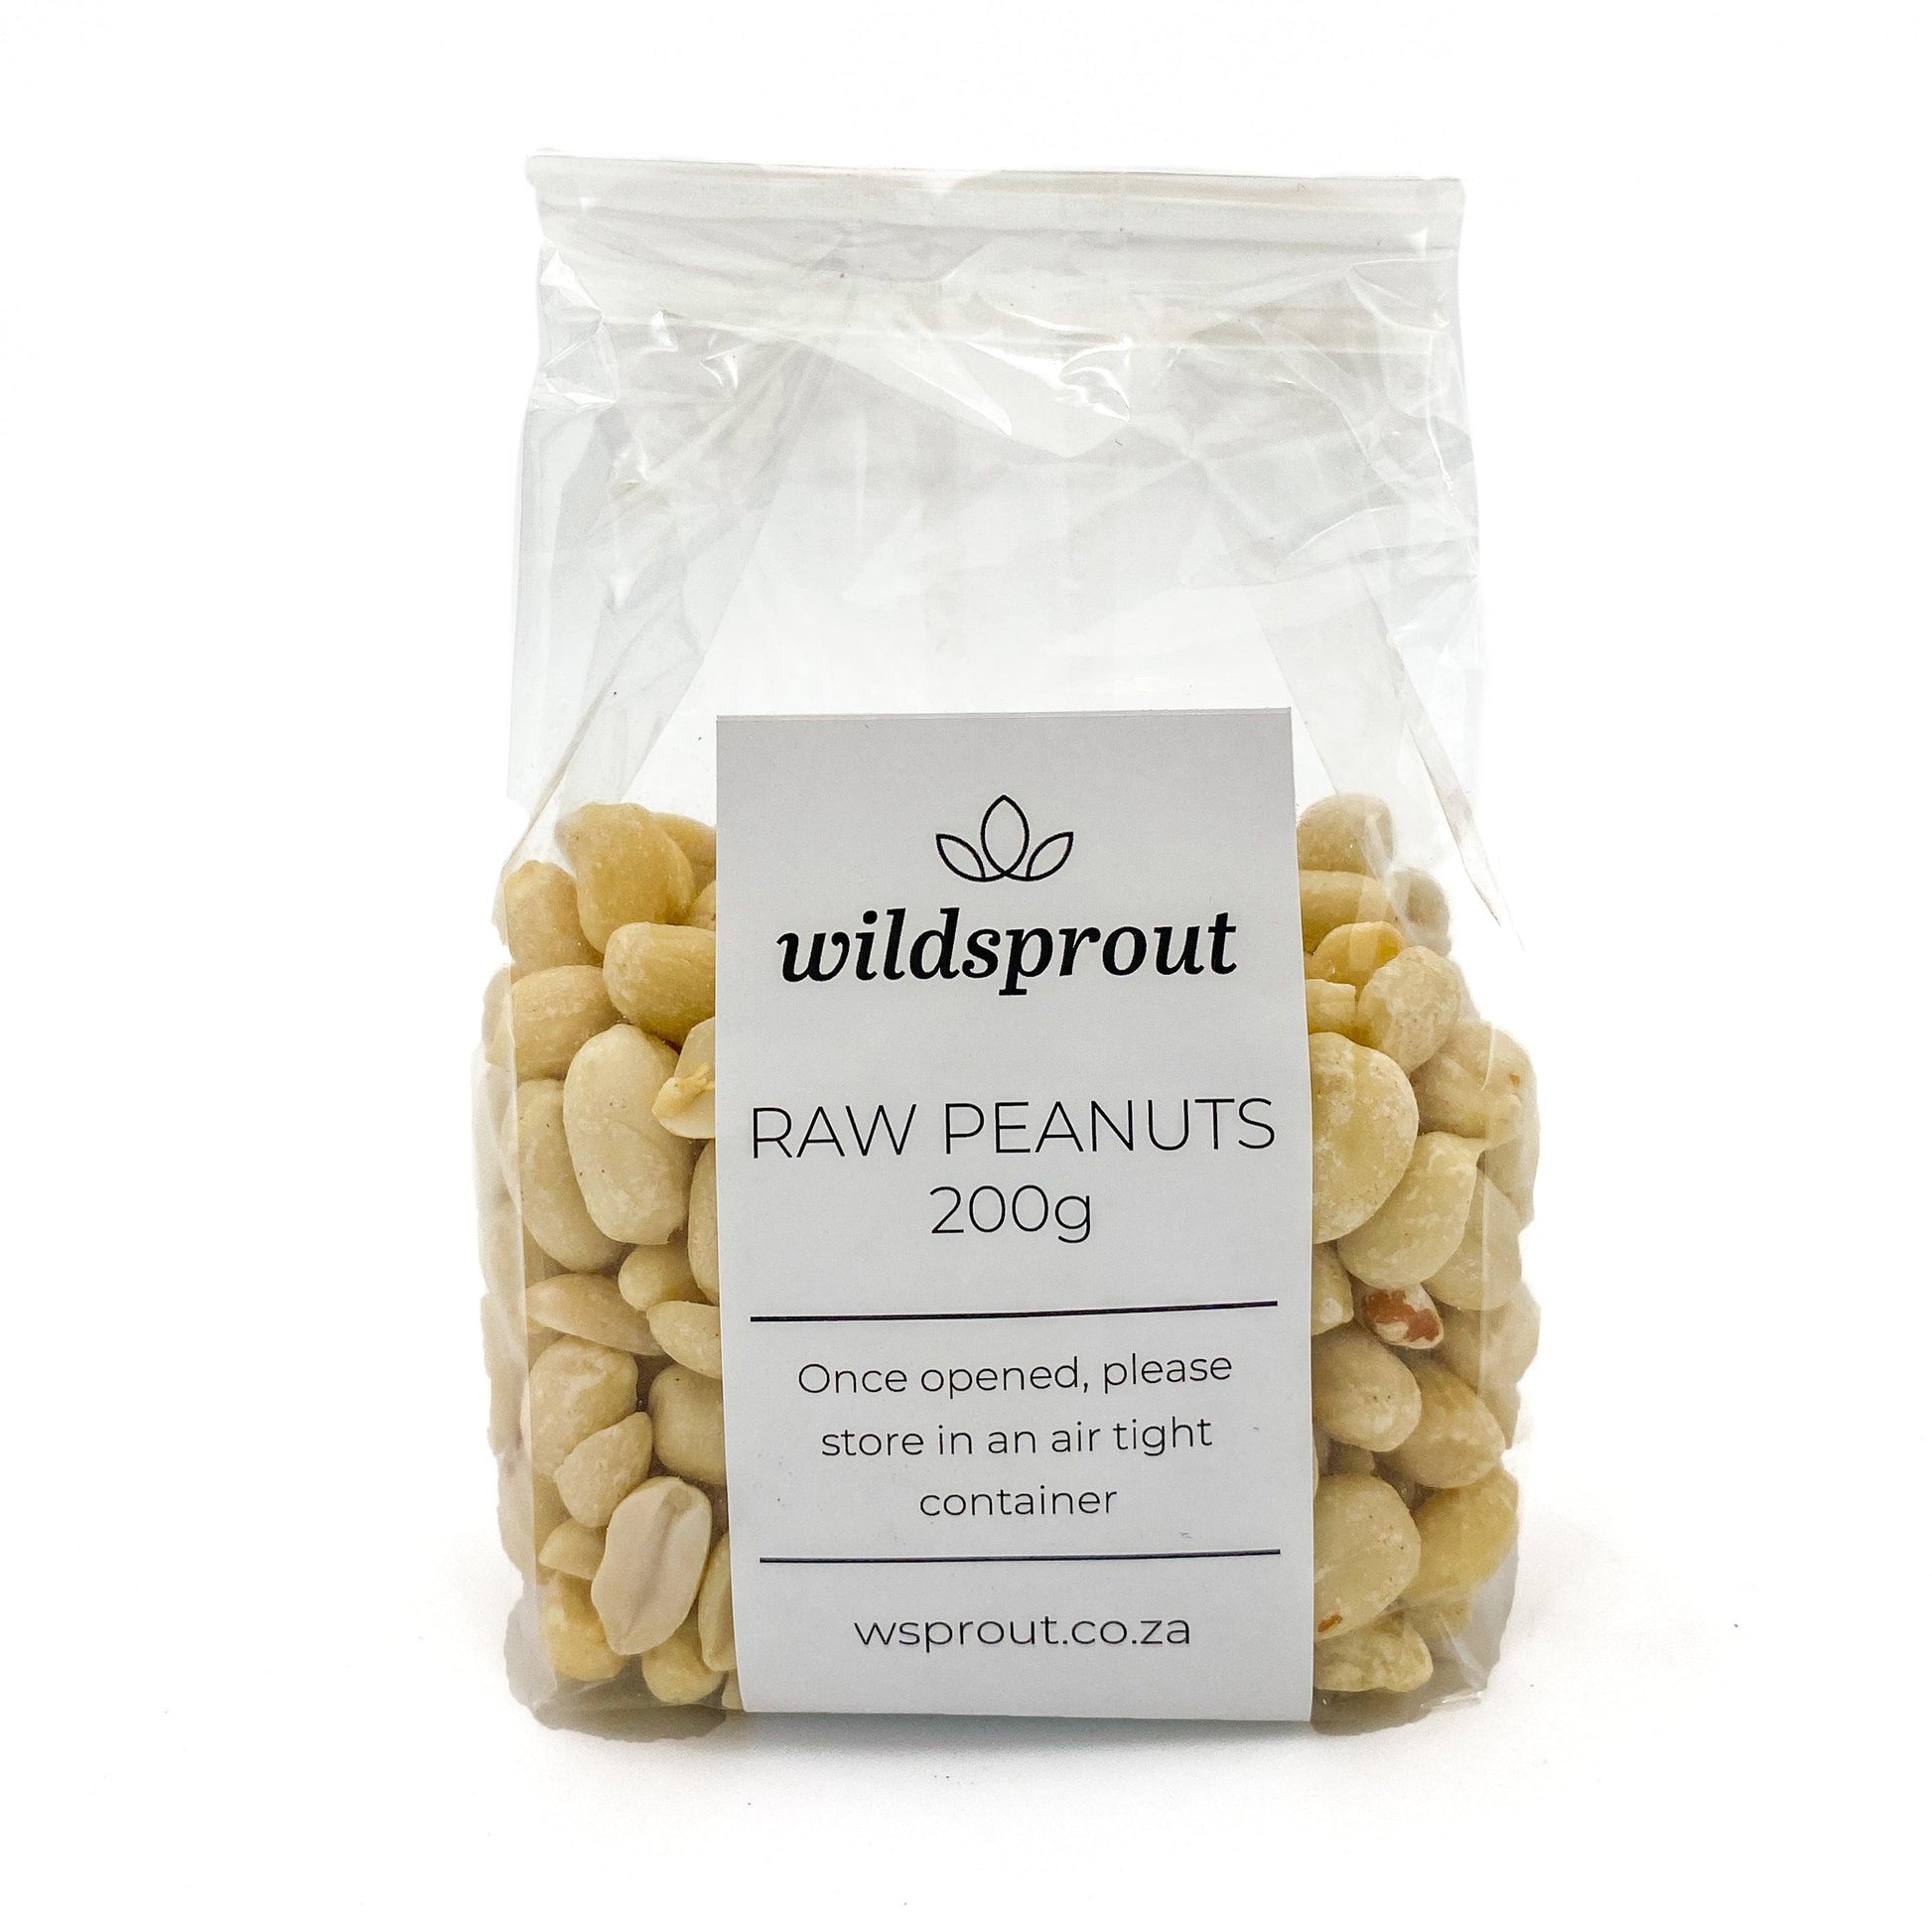 Raw Peanuts 200g - Wildsprout